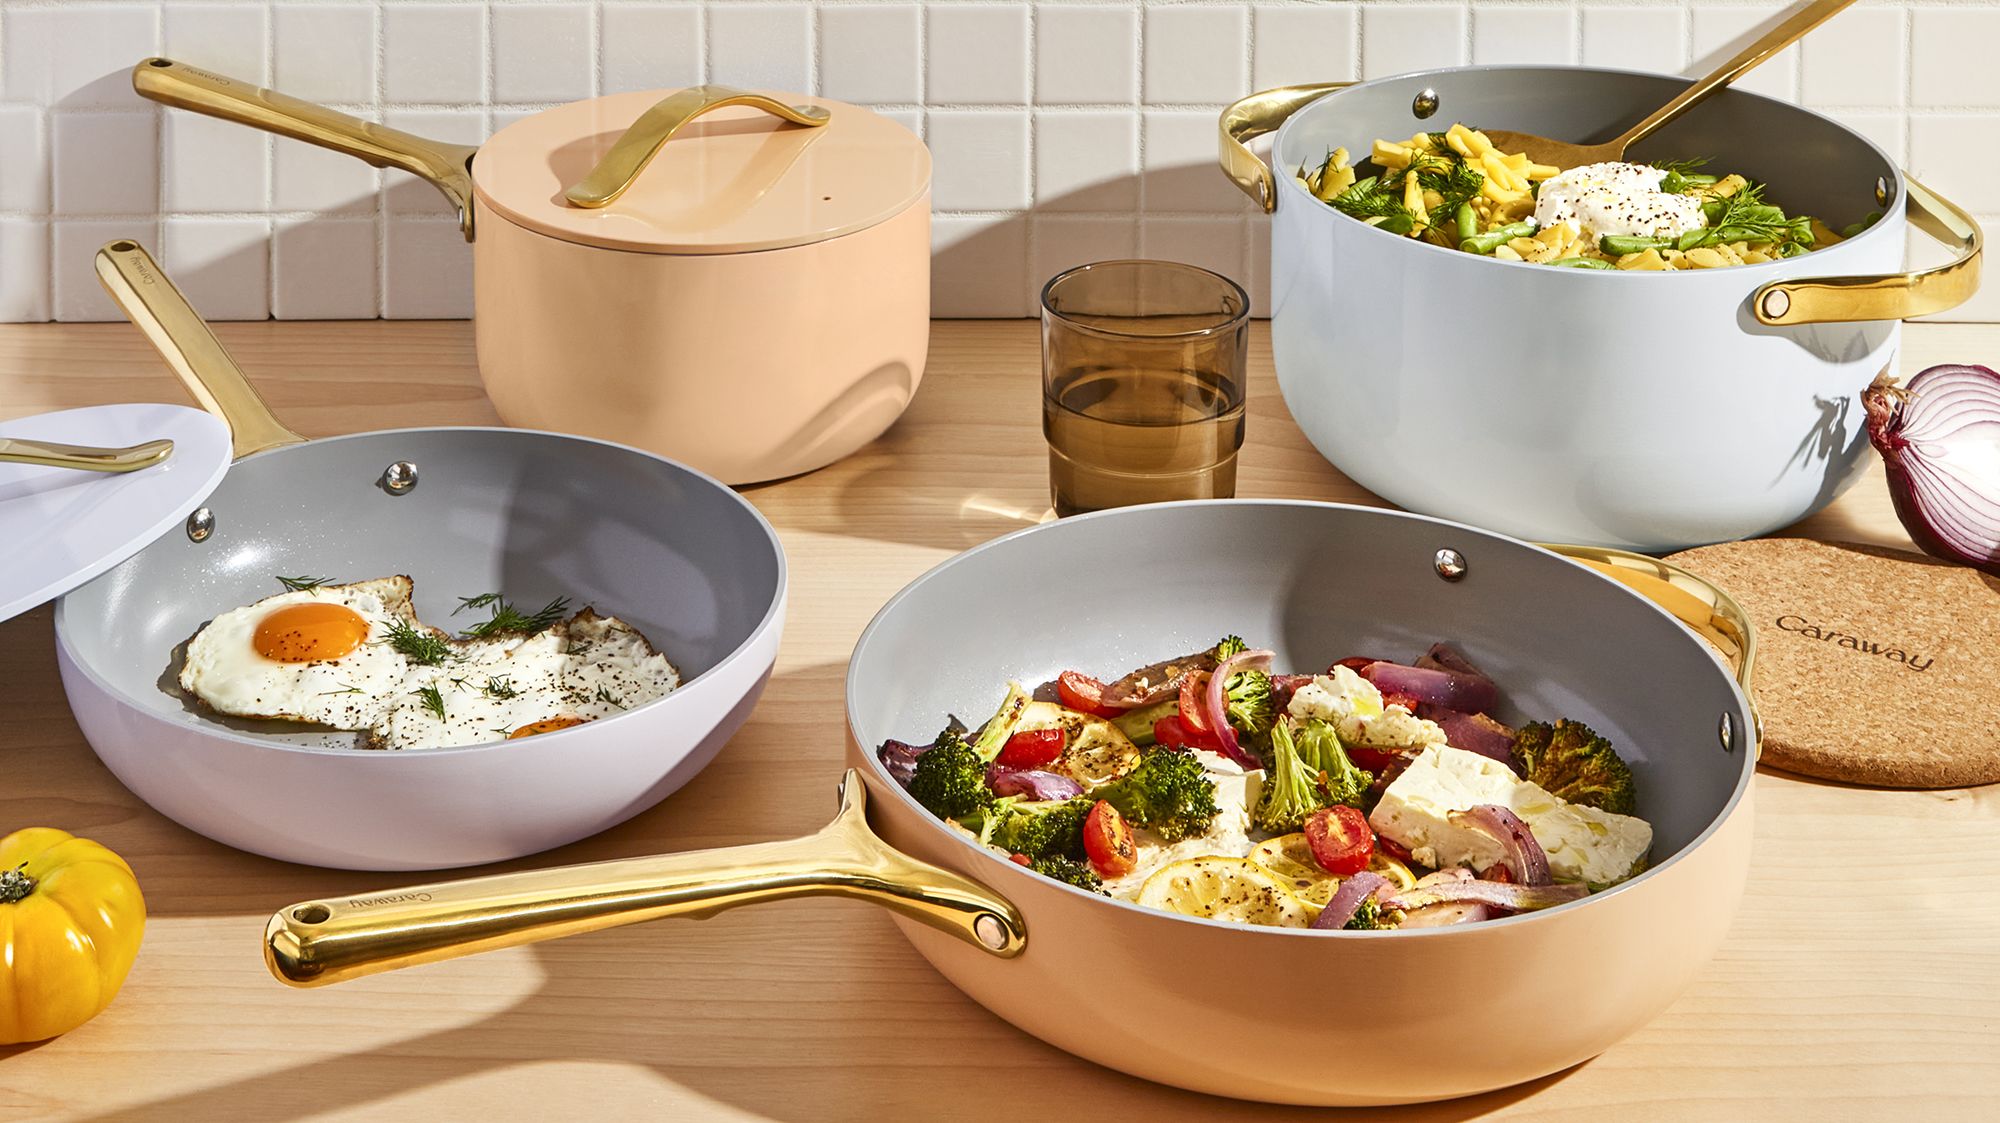 This Caraway Pan Set Is A Gift Worth The Hype That They'll